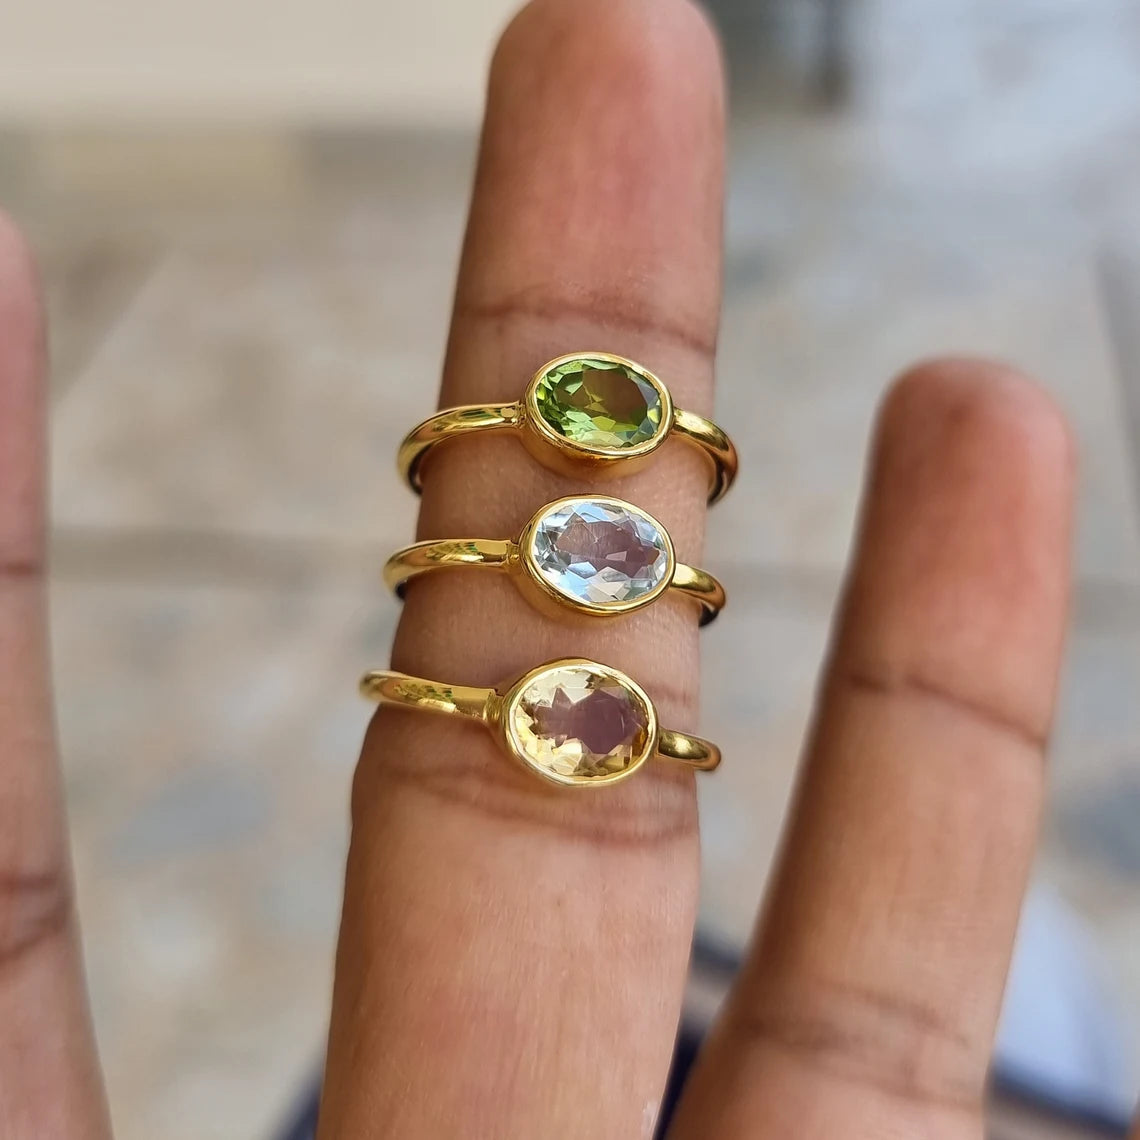 Natural Peridot Oval Gold Ring, Citrine Oval Gold Ring, Oval Cut Blue Topaz Gold Ring, August Birthstone, Jewelry, Green Peridot Gemstone,